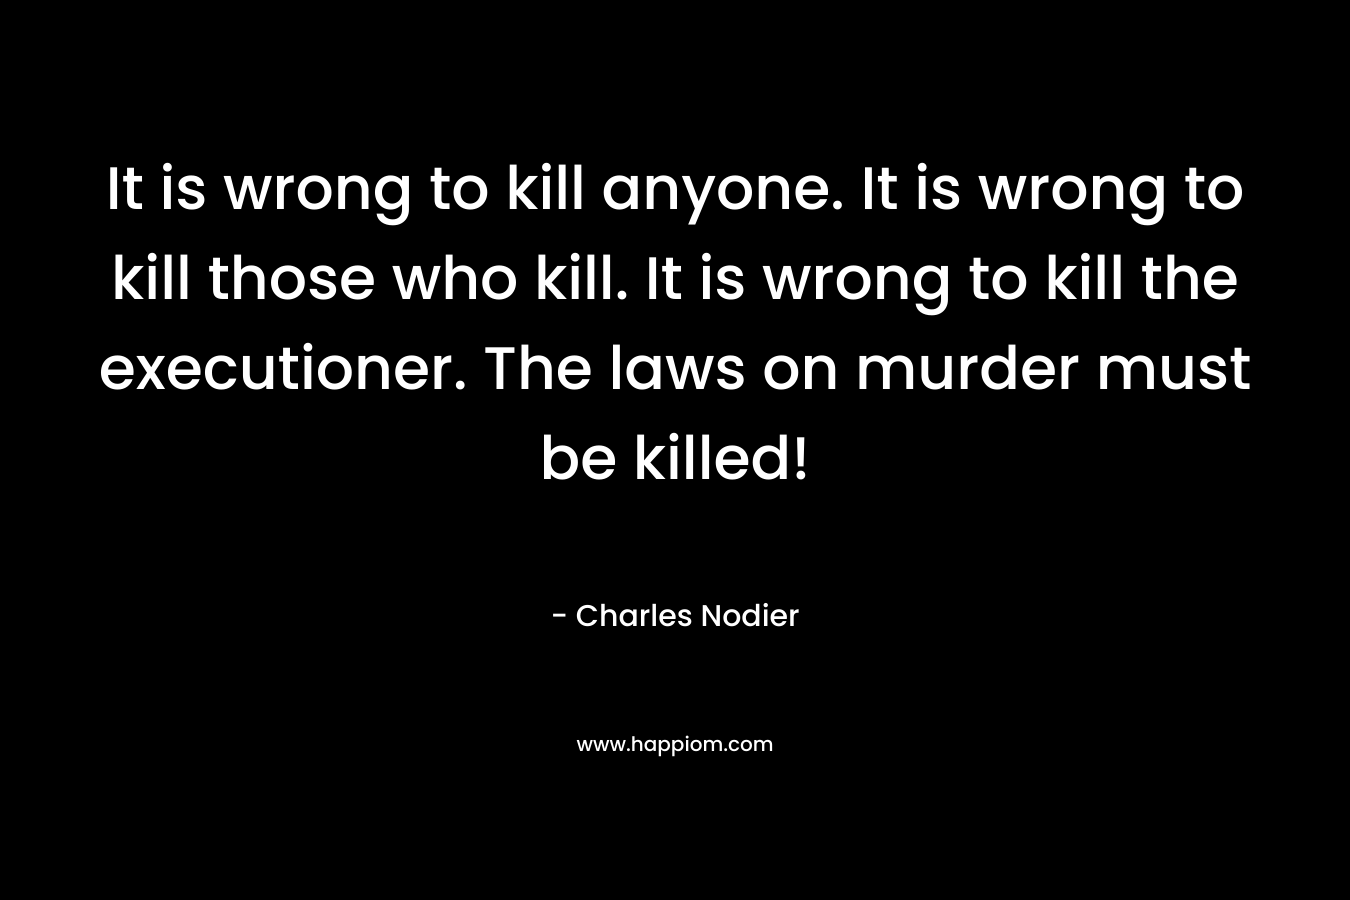 It is wrong to kill anyone. It is wrong to kill those who kill. It is wrong to kill the executioner. The laws on murder must be killed! – Charles Nodier